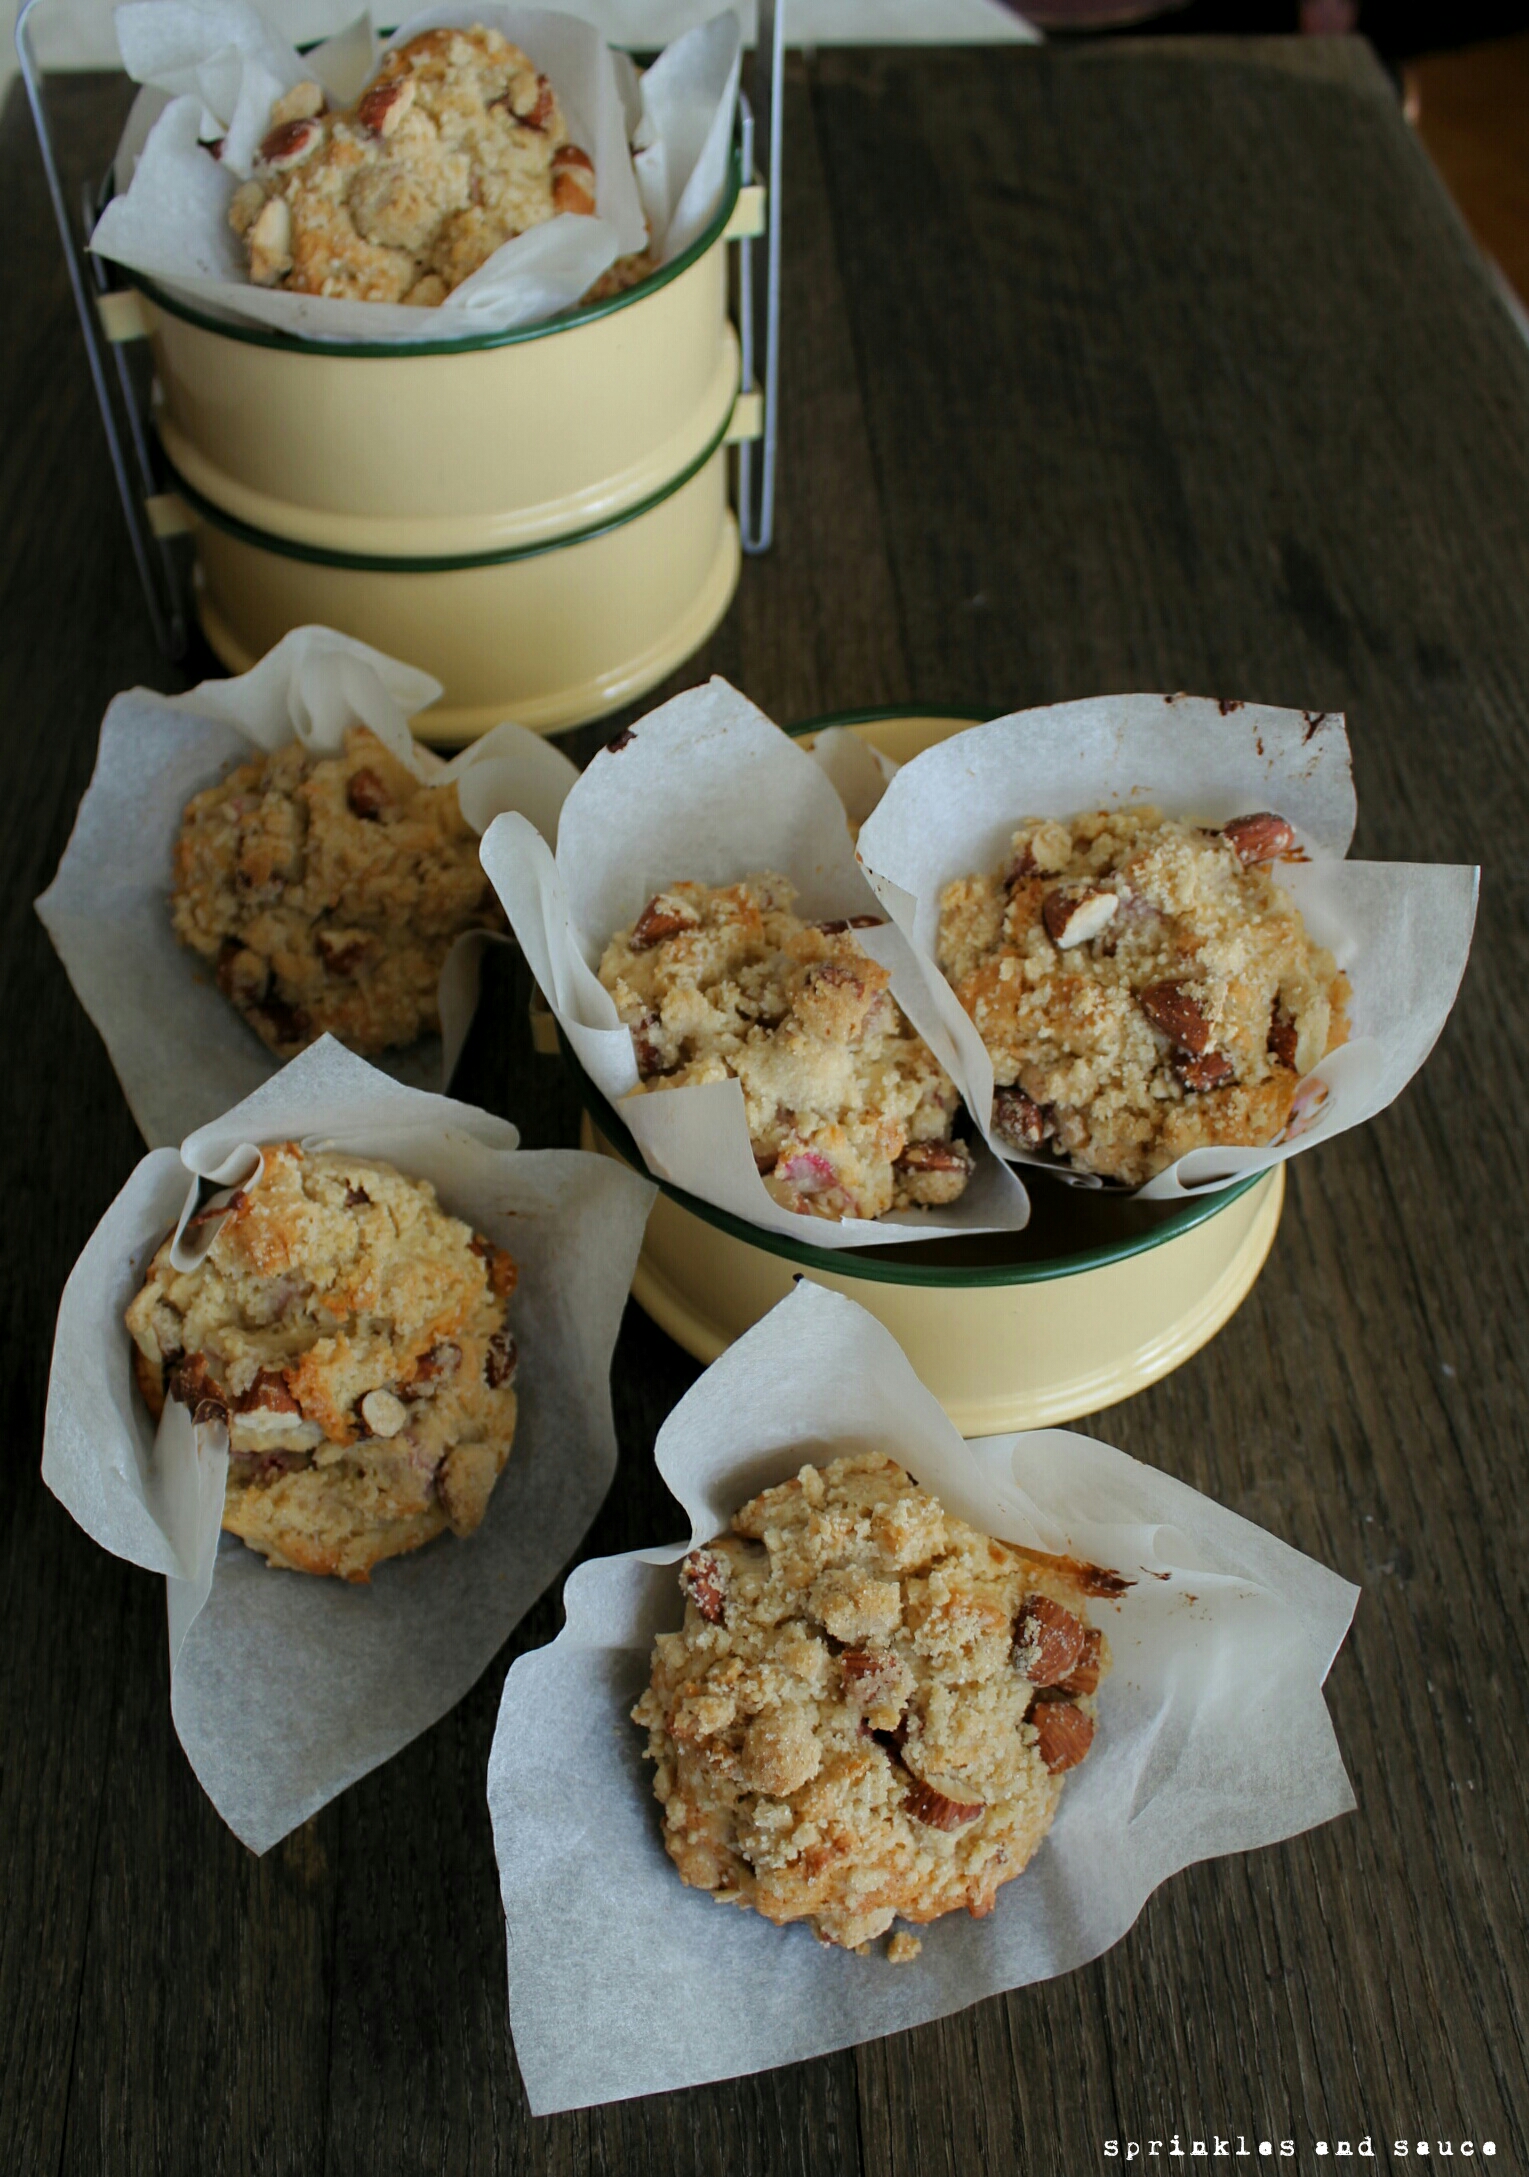 Rhubarb Muffins with Almond Streusel